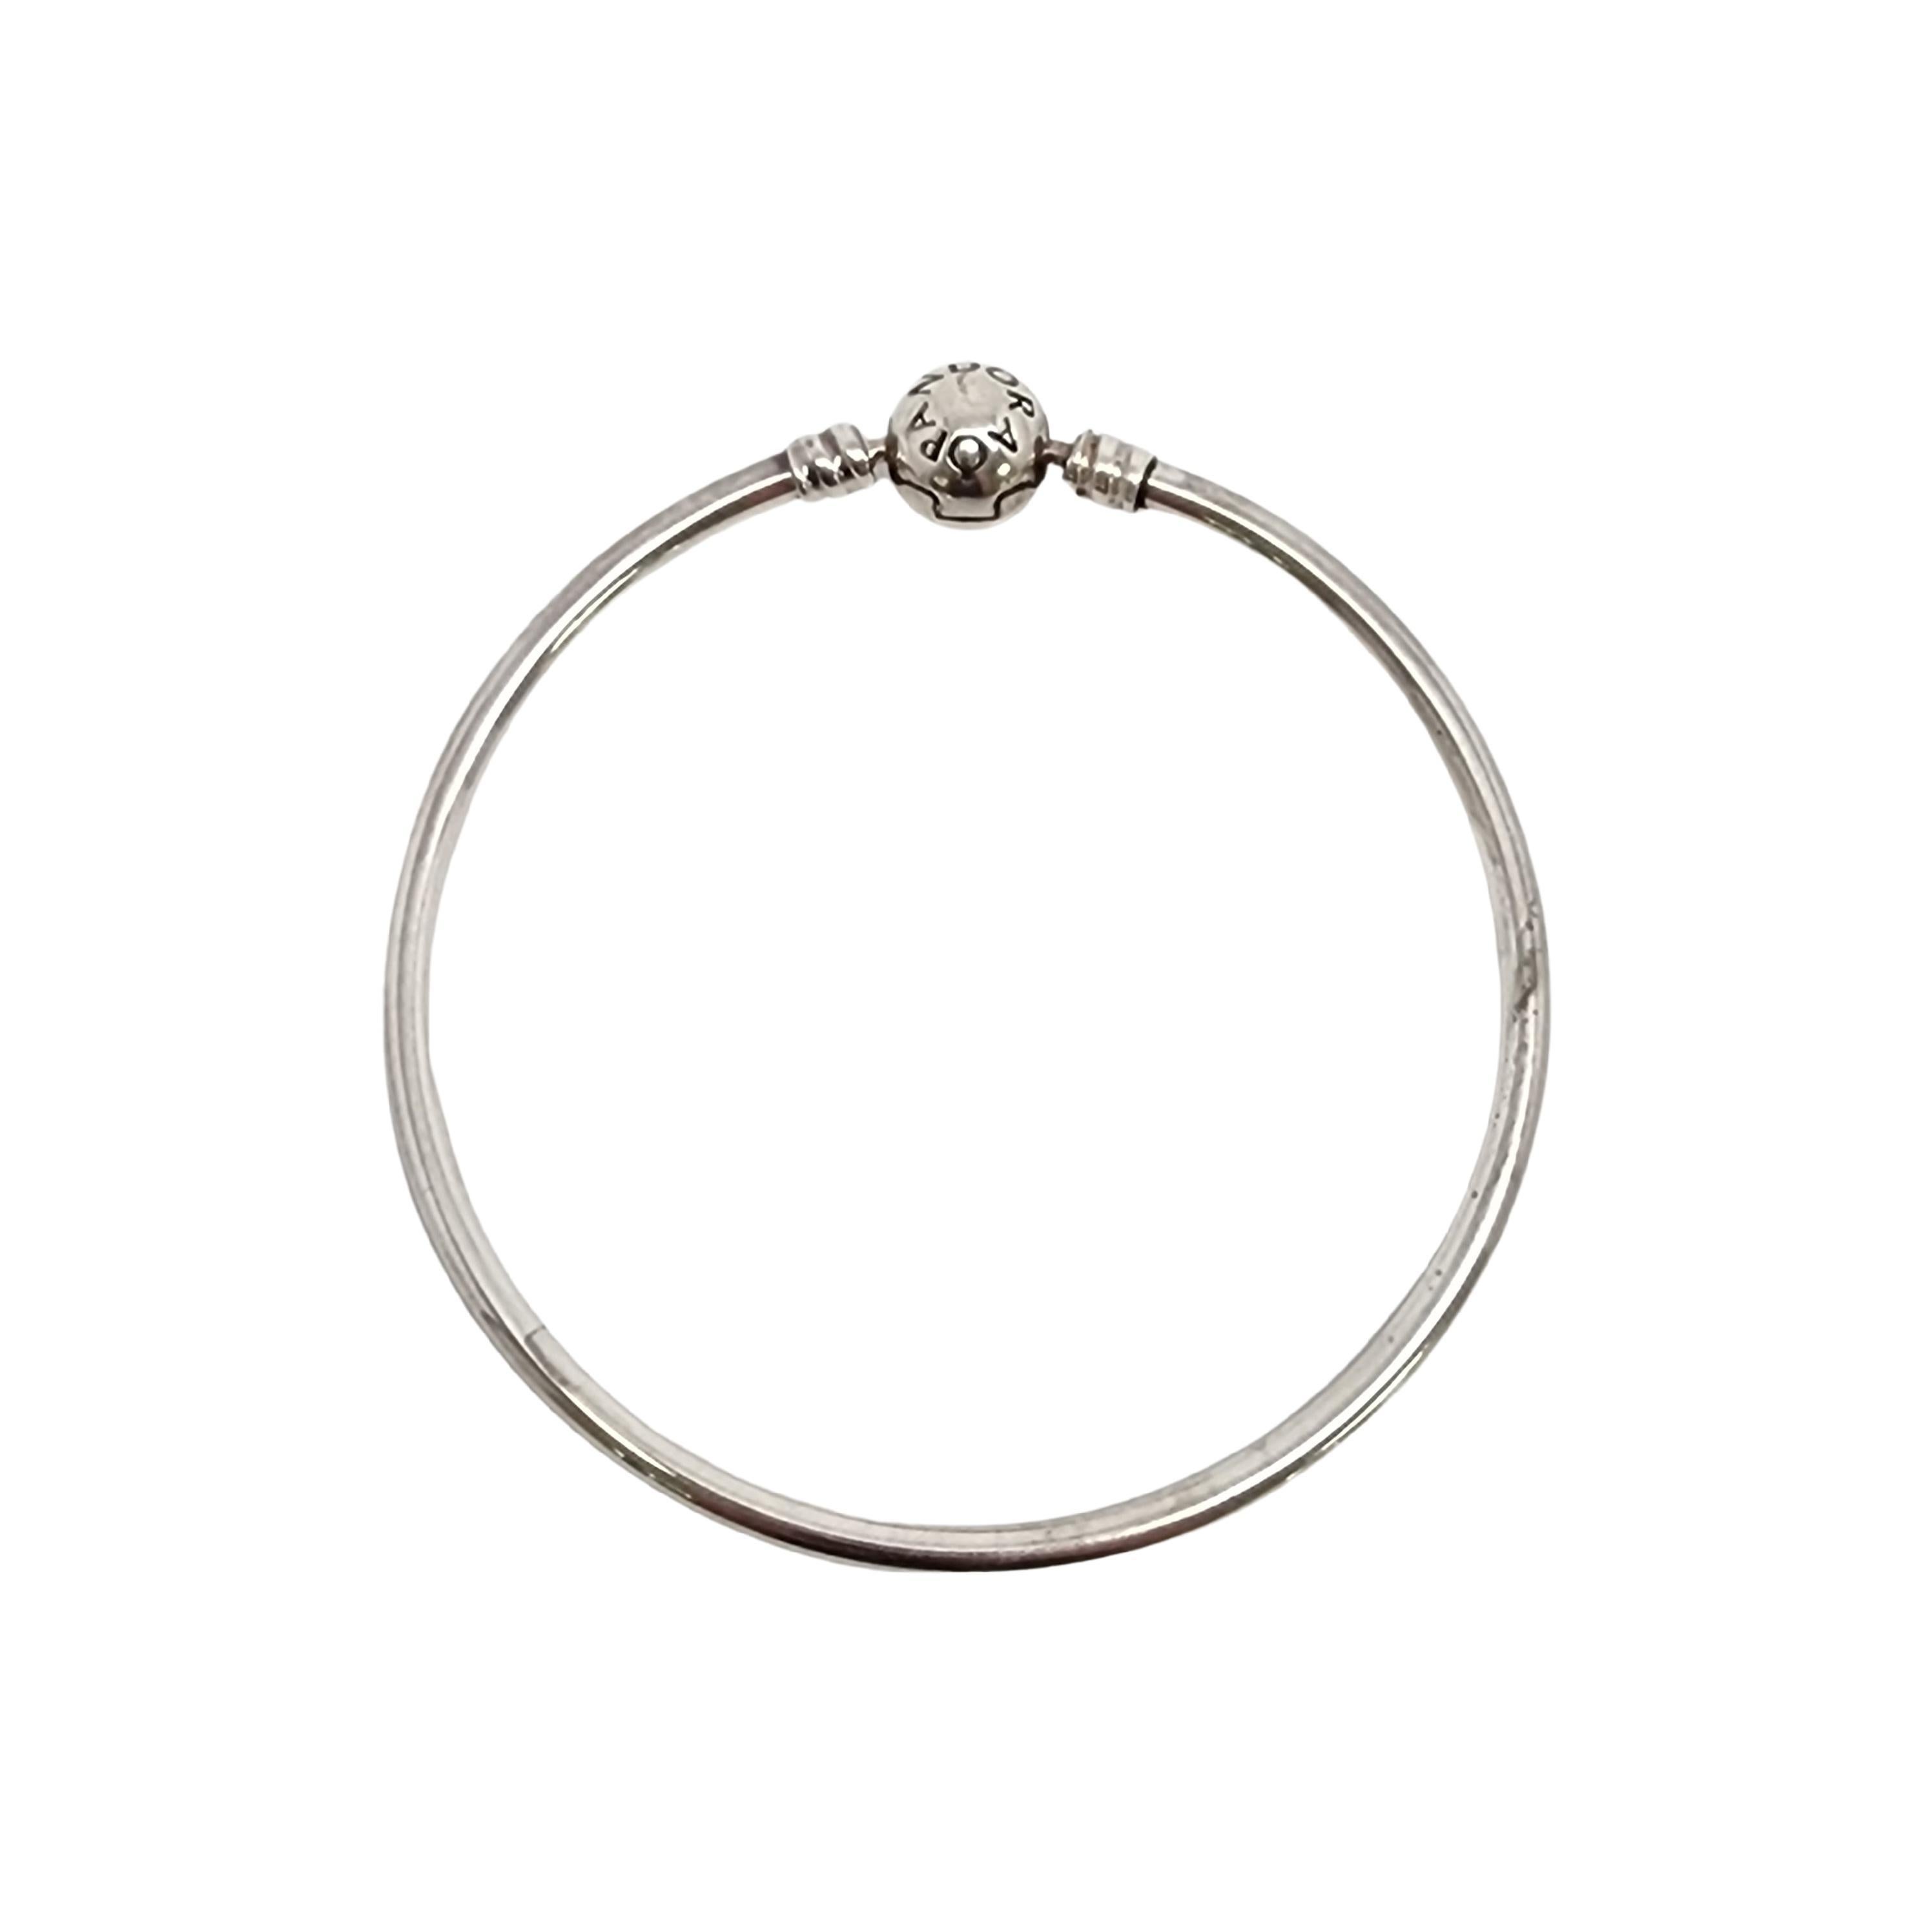 Authentic Pandora Moments Sterling Silver Bangle Bracelet.

#590713-19

Pandora's bangle bracelet featuring a ball clasp.

Weighs approx 5.7dwt, 8.9g

Measures approx 7 1/4